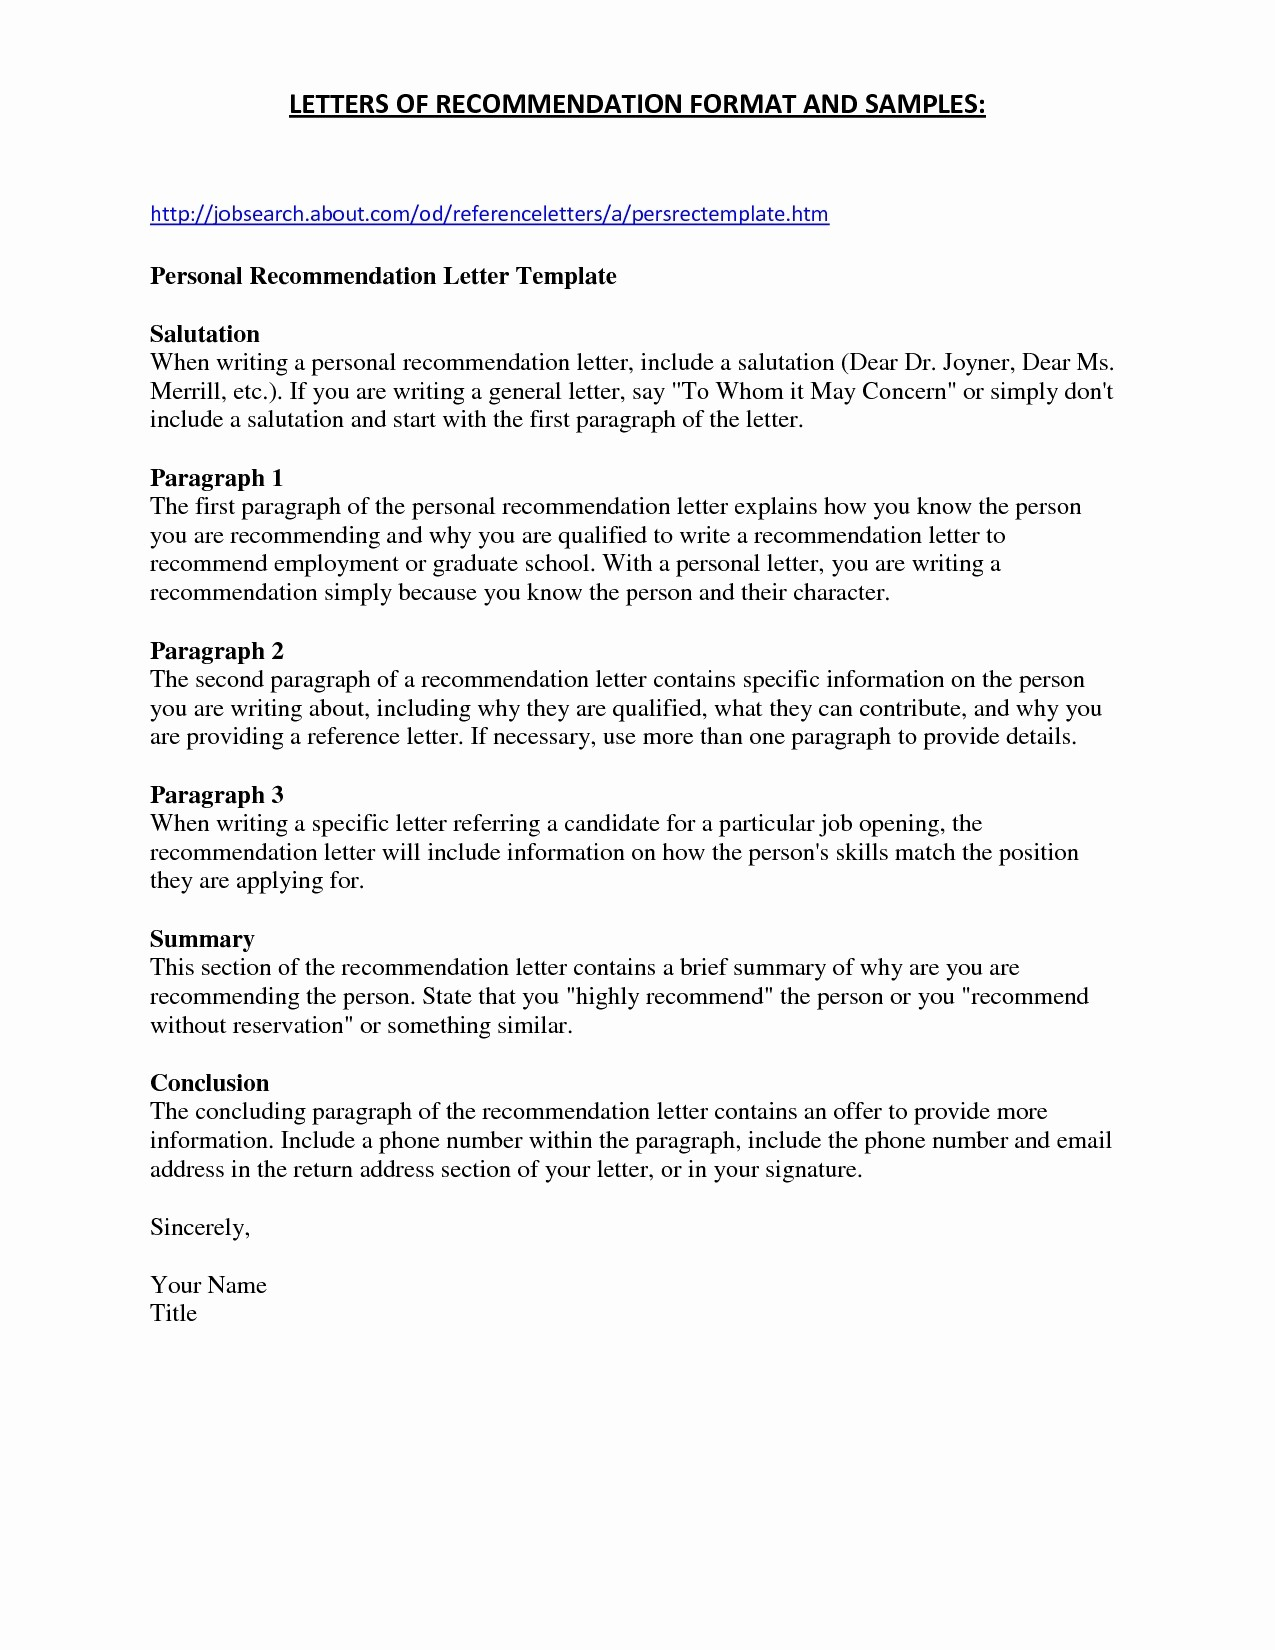 Business Plan Letter Template - Business Brief Template Fresh Business Plan for Personal Care Home